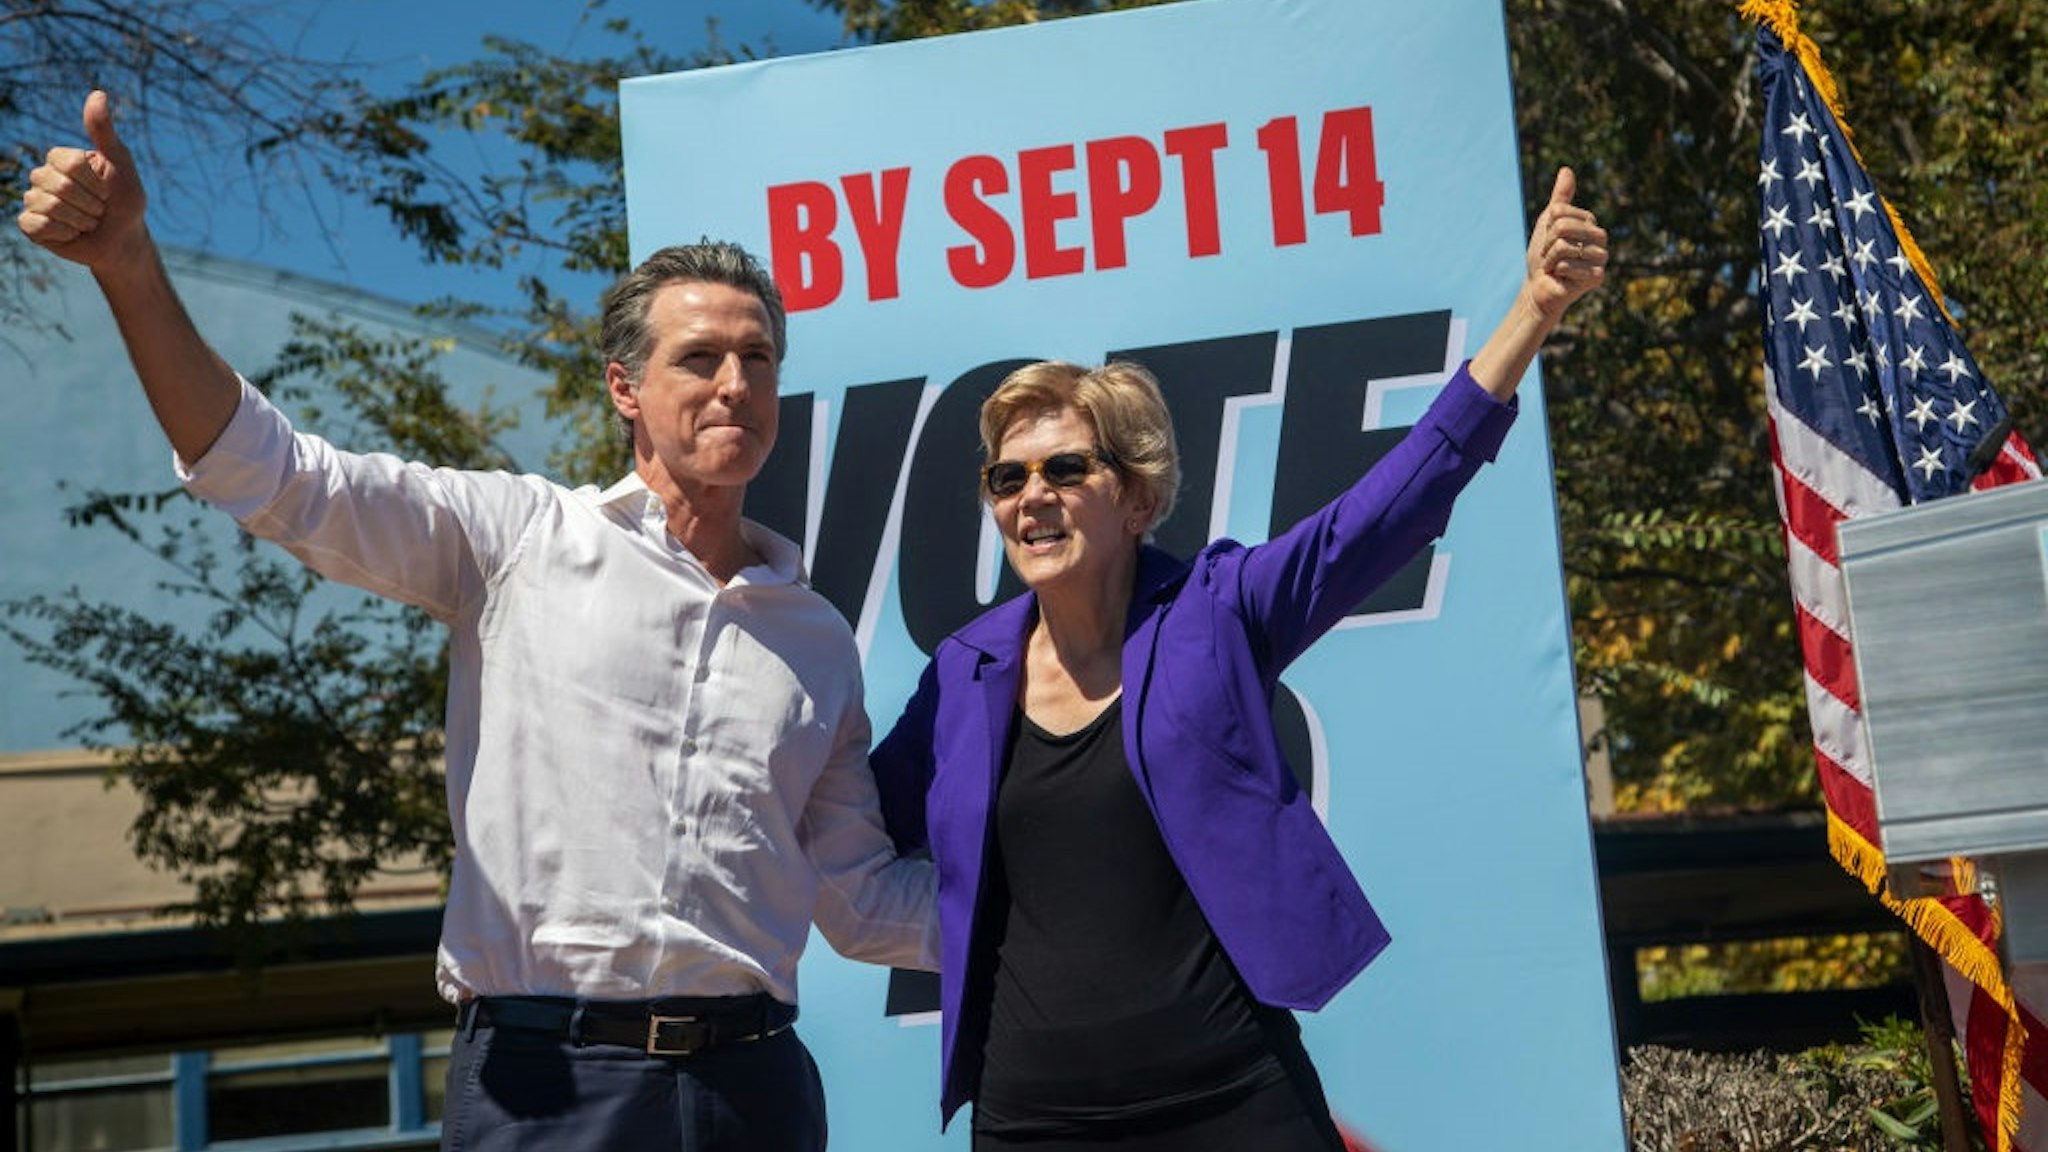 CULVER CITY, CA - SEPTEMBER 04: California Gov. Gavin Newsom and Sen. Elizabeth Warren (D-MA) take to the stage at a "Stop the Republican Recall" rally at Culver City High School on September 4 in Culver City, California.